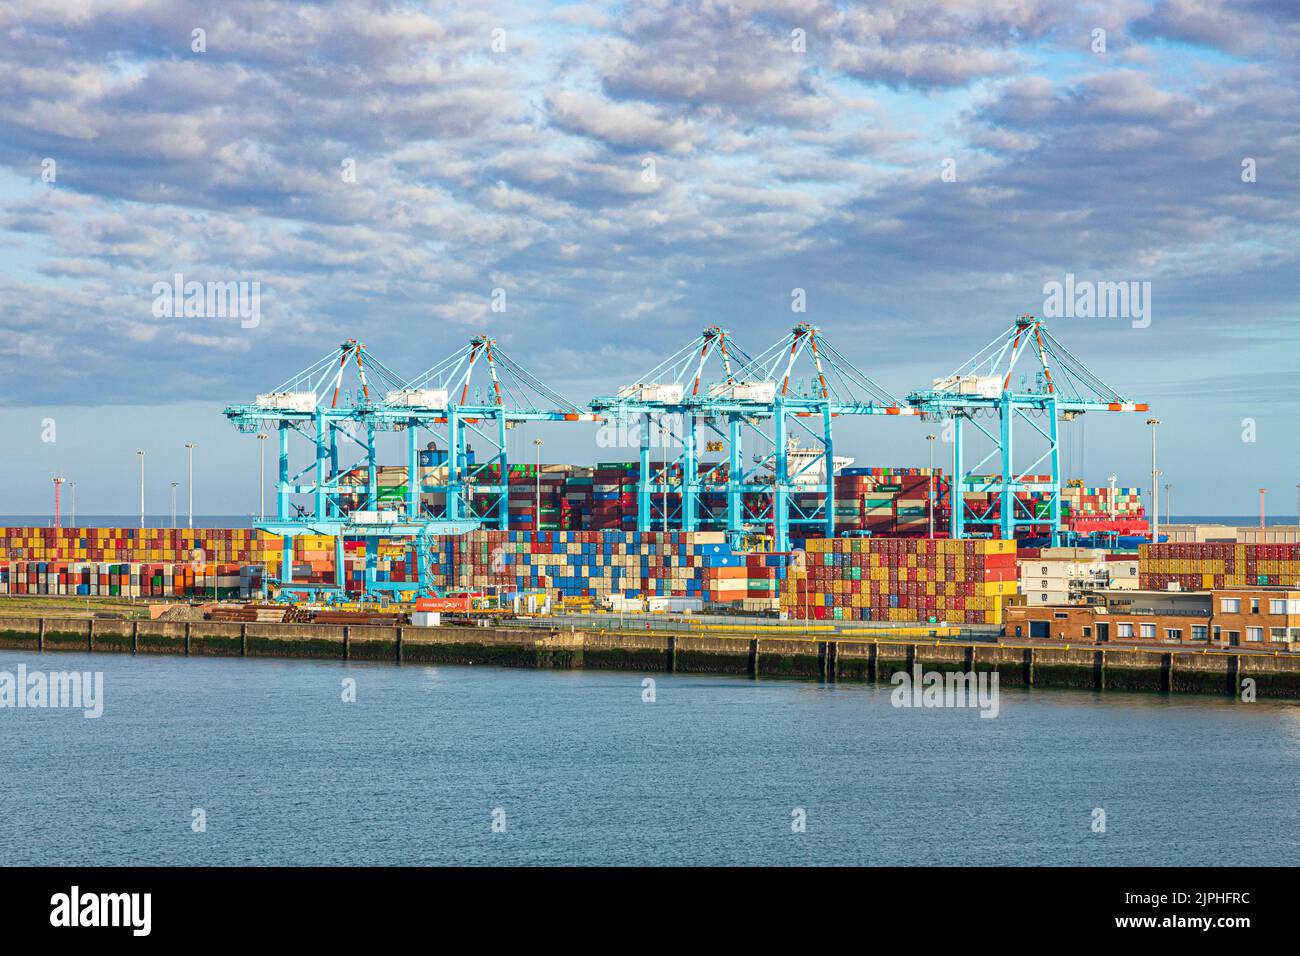 Containers awaiting transhipment on the dockside in the harbour at Zeebrugge, Belgium Stock Photo